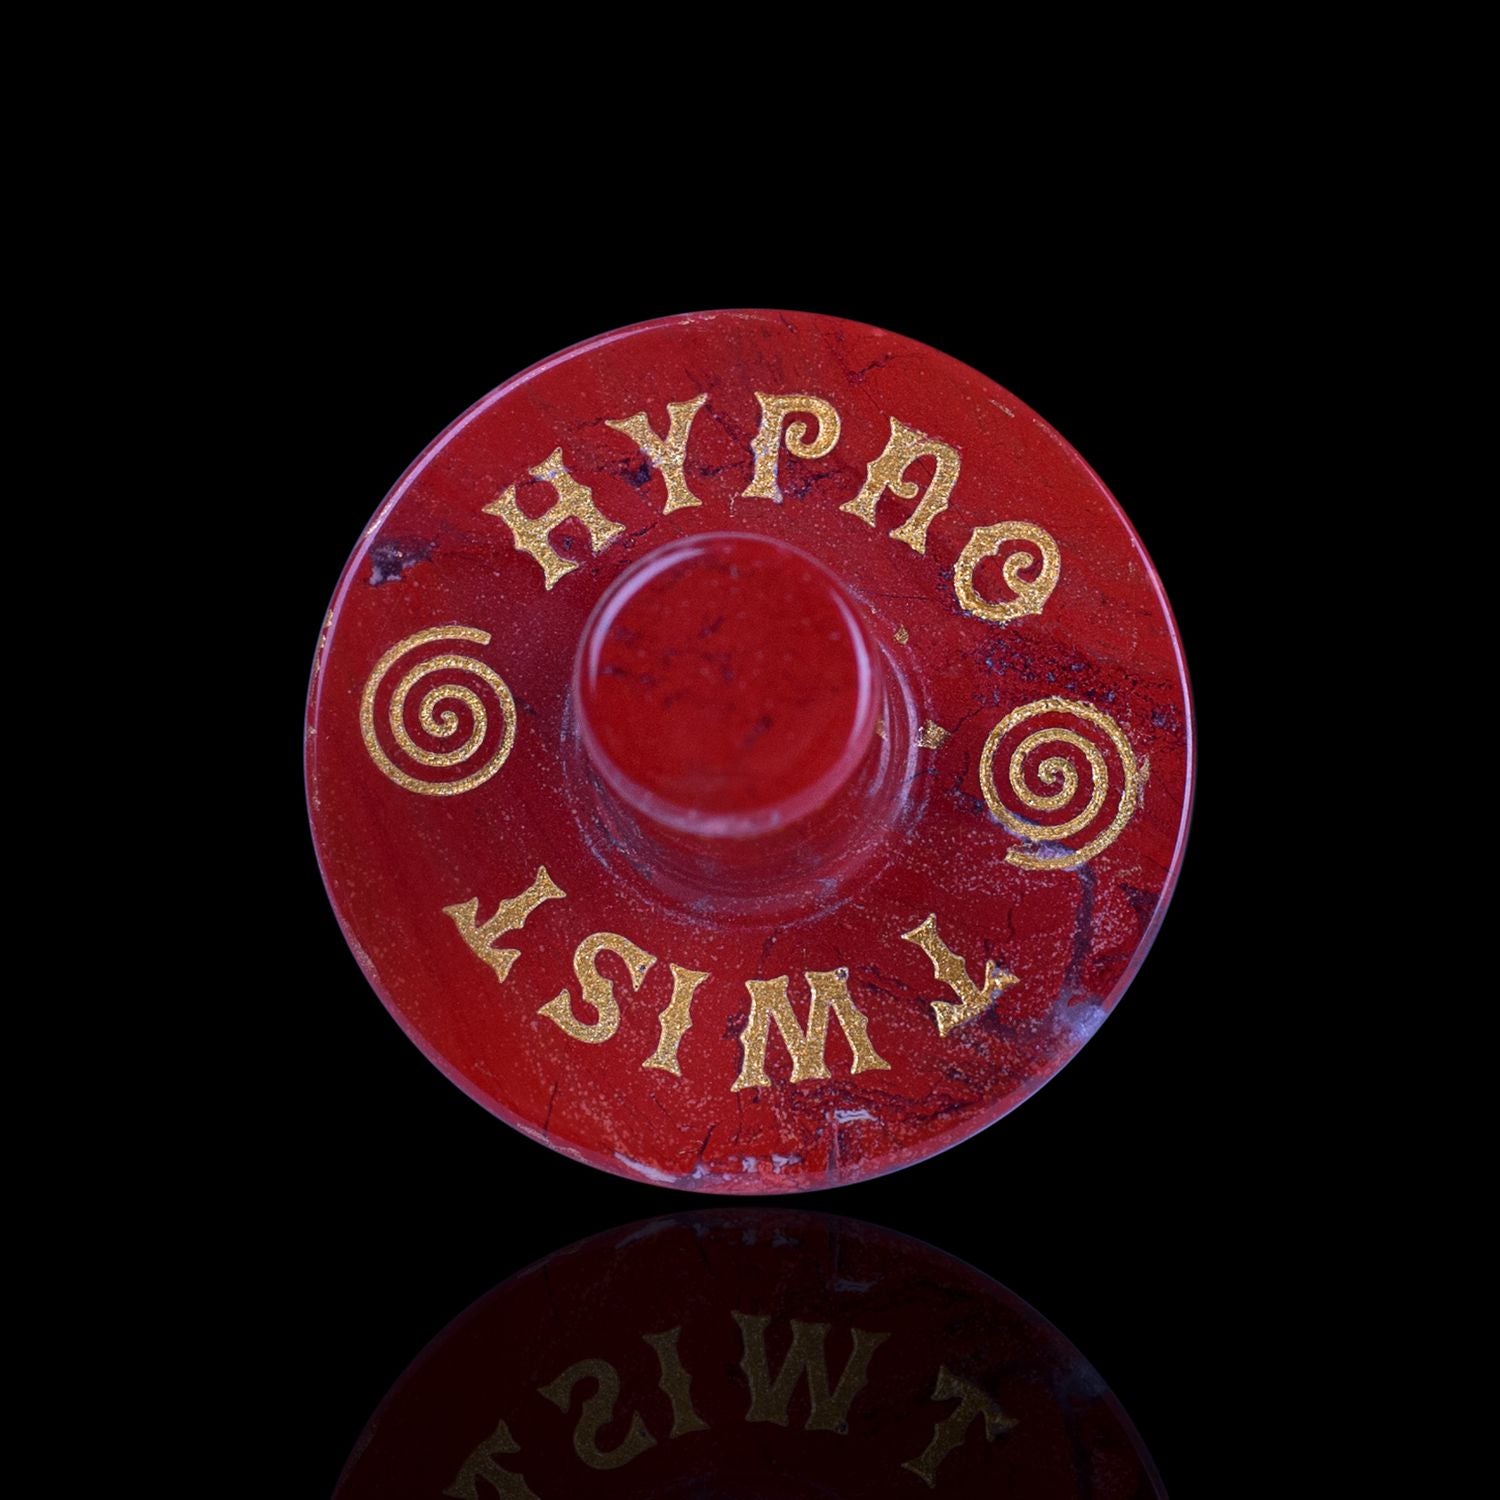  Front View Of The Naturally Wicked Exclusive Hypnotwister. A Red Jasper Crystal Spinning Top Engraved With Hypno Twist